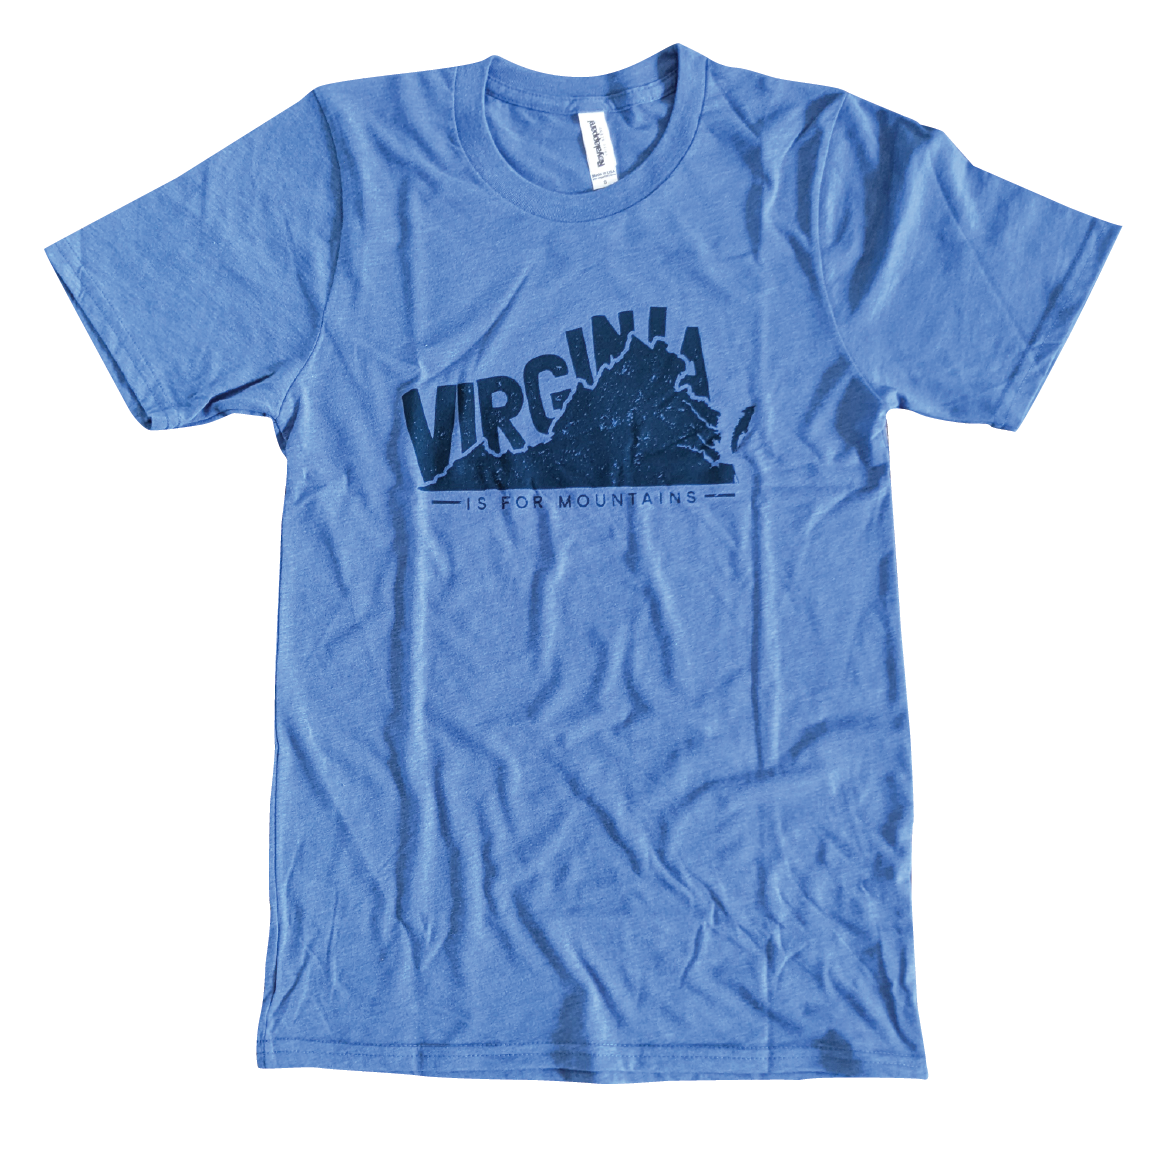 Virginia is for Mountains Blue T-shirt